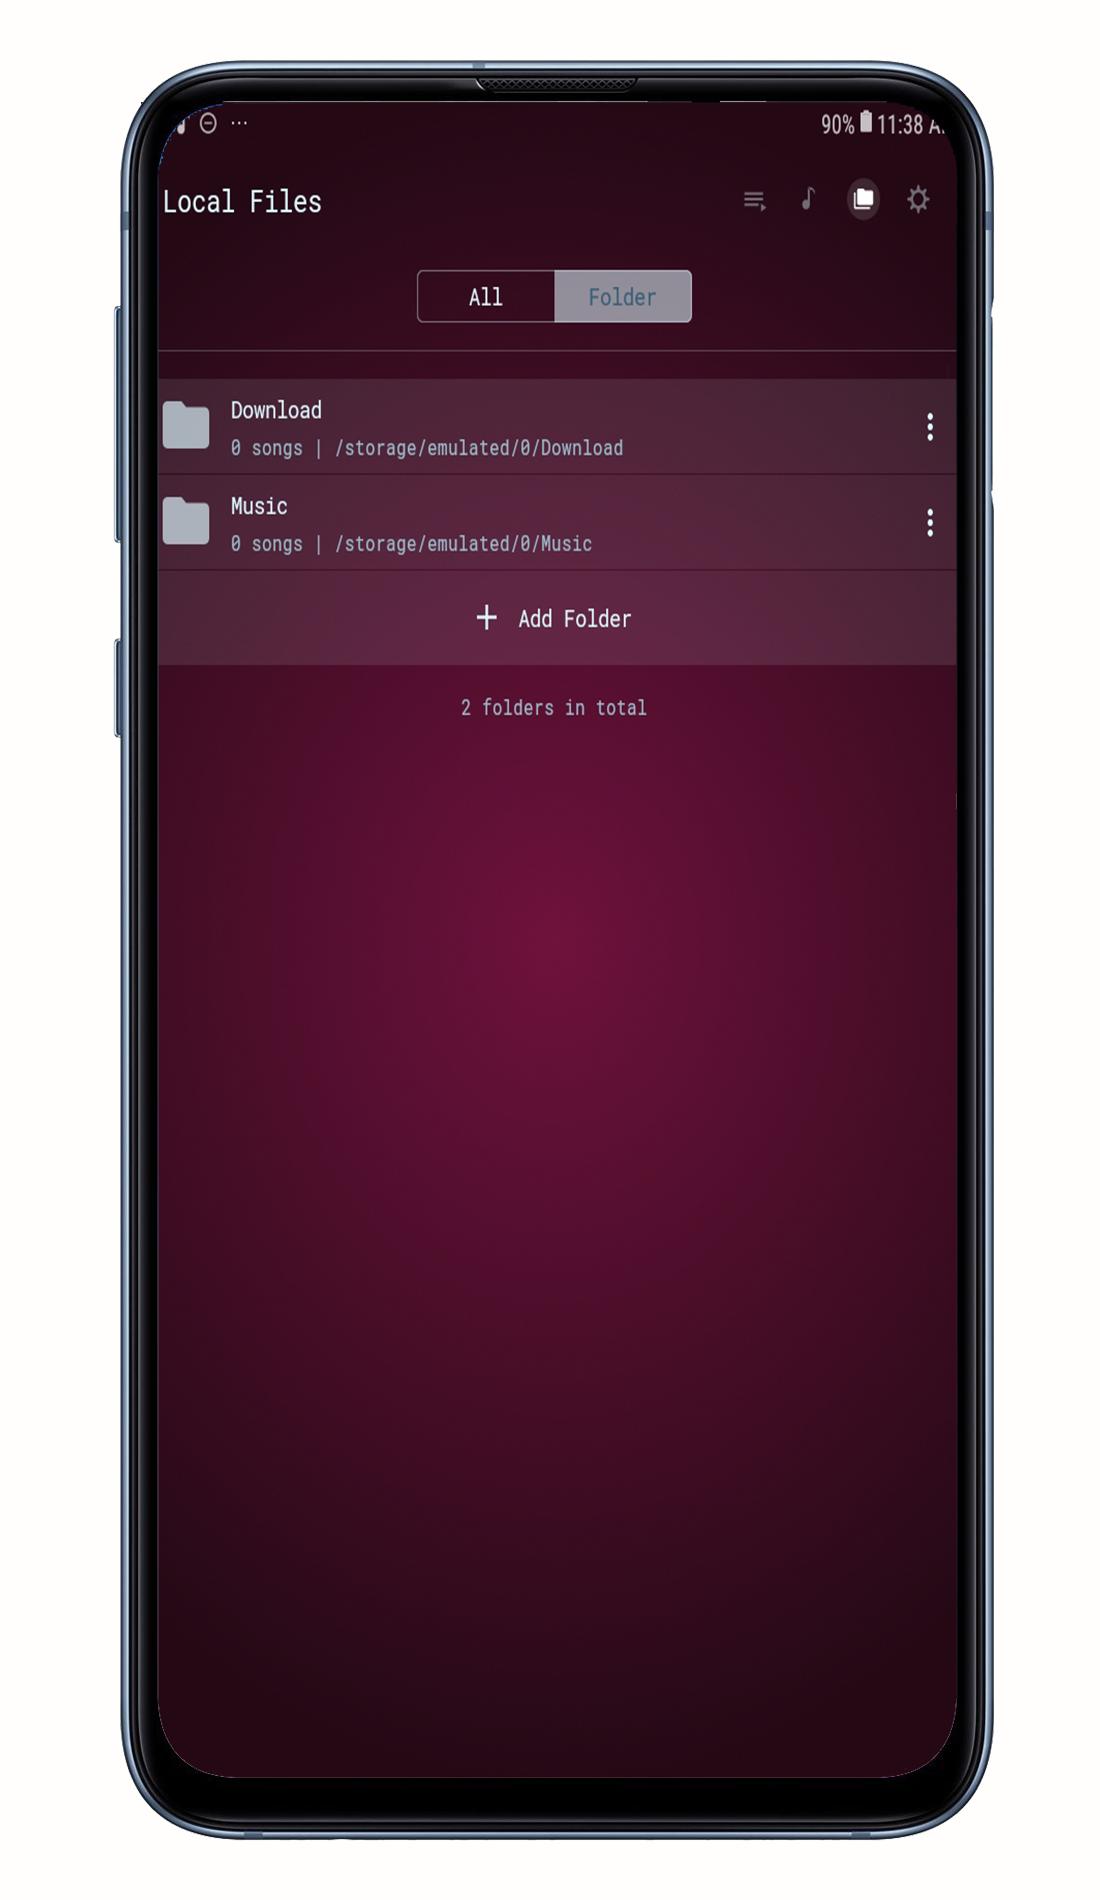 mp3 player - music audio playlist maker / creator for Android - APK Download